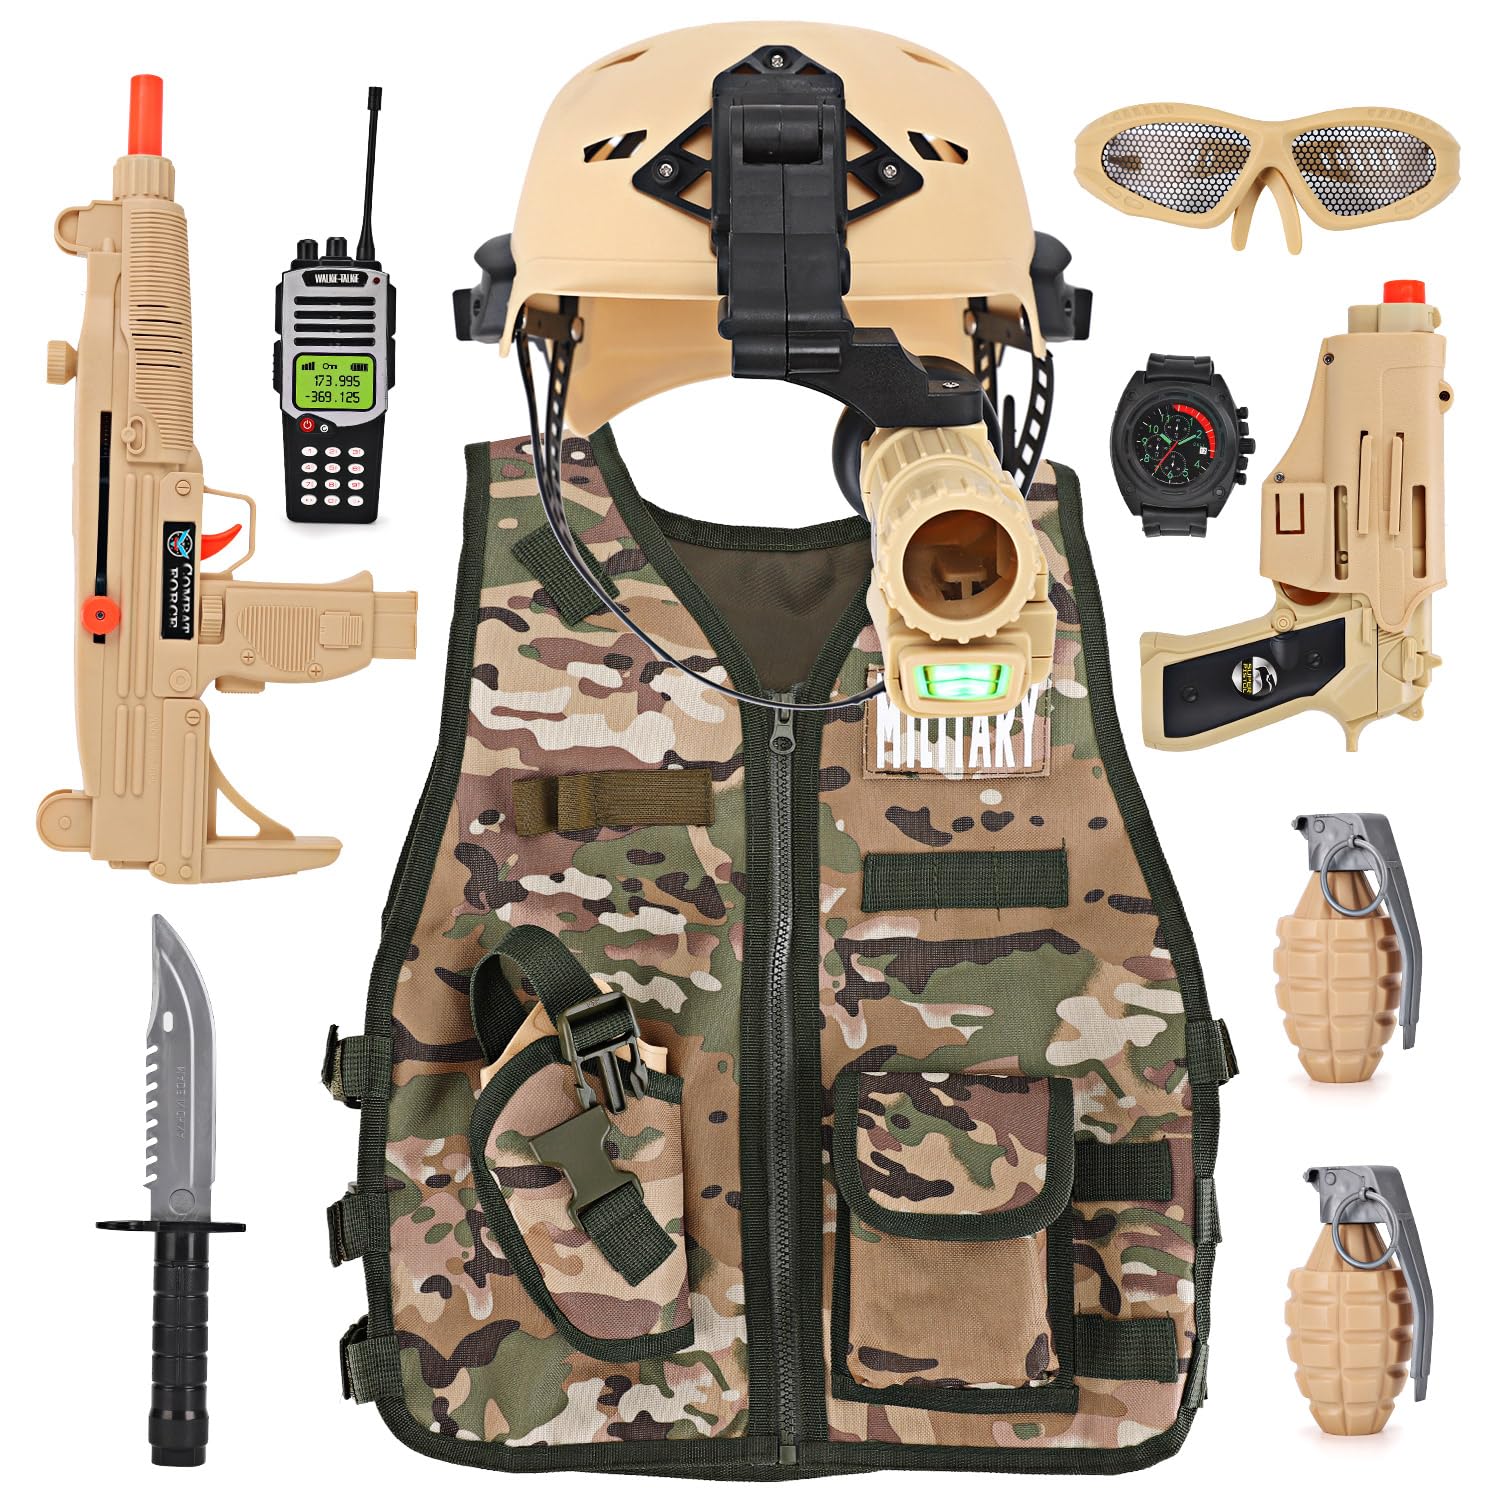 Liberty Imports Kids Army Soldier Military Combat Marines Desert Camo Halloween Costume, Deluxe Dress Up Cosplay Role Play Set with Helmet, Monocular, Toy Guns, Accessories (11 Pcs)